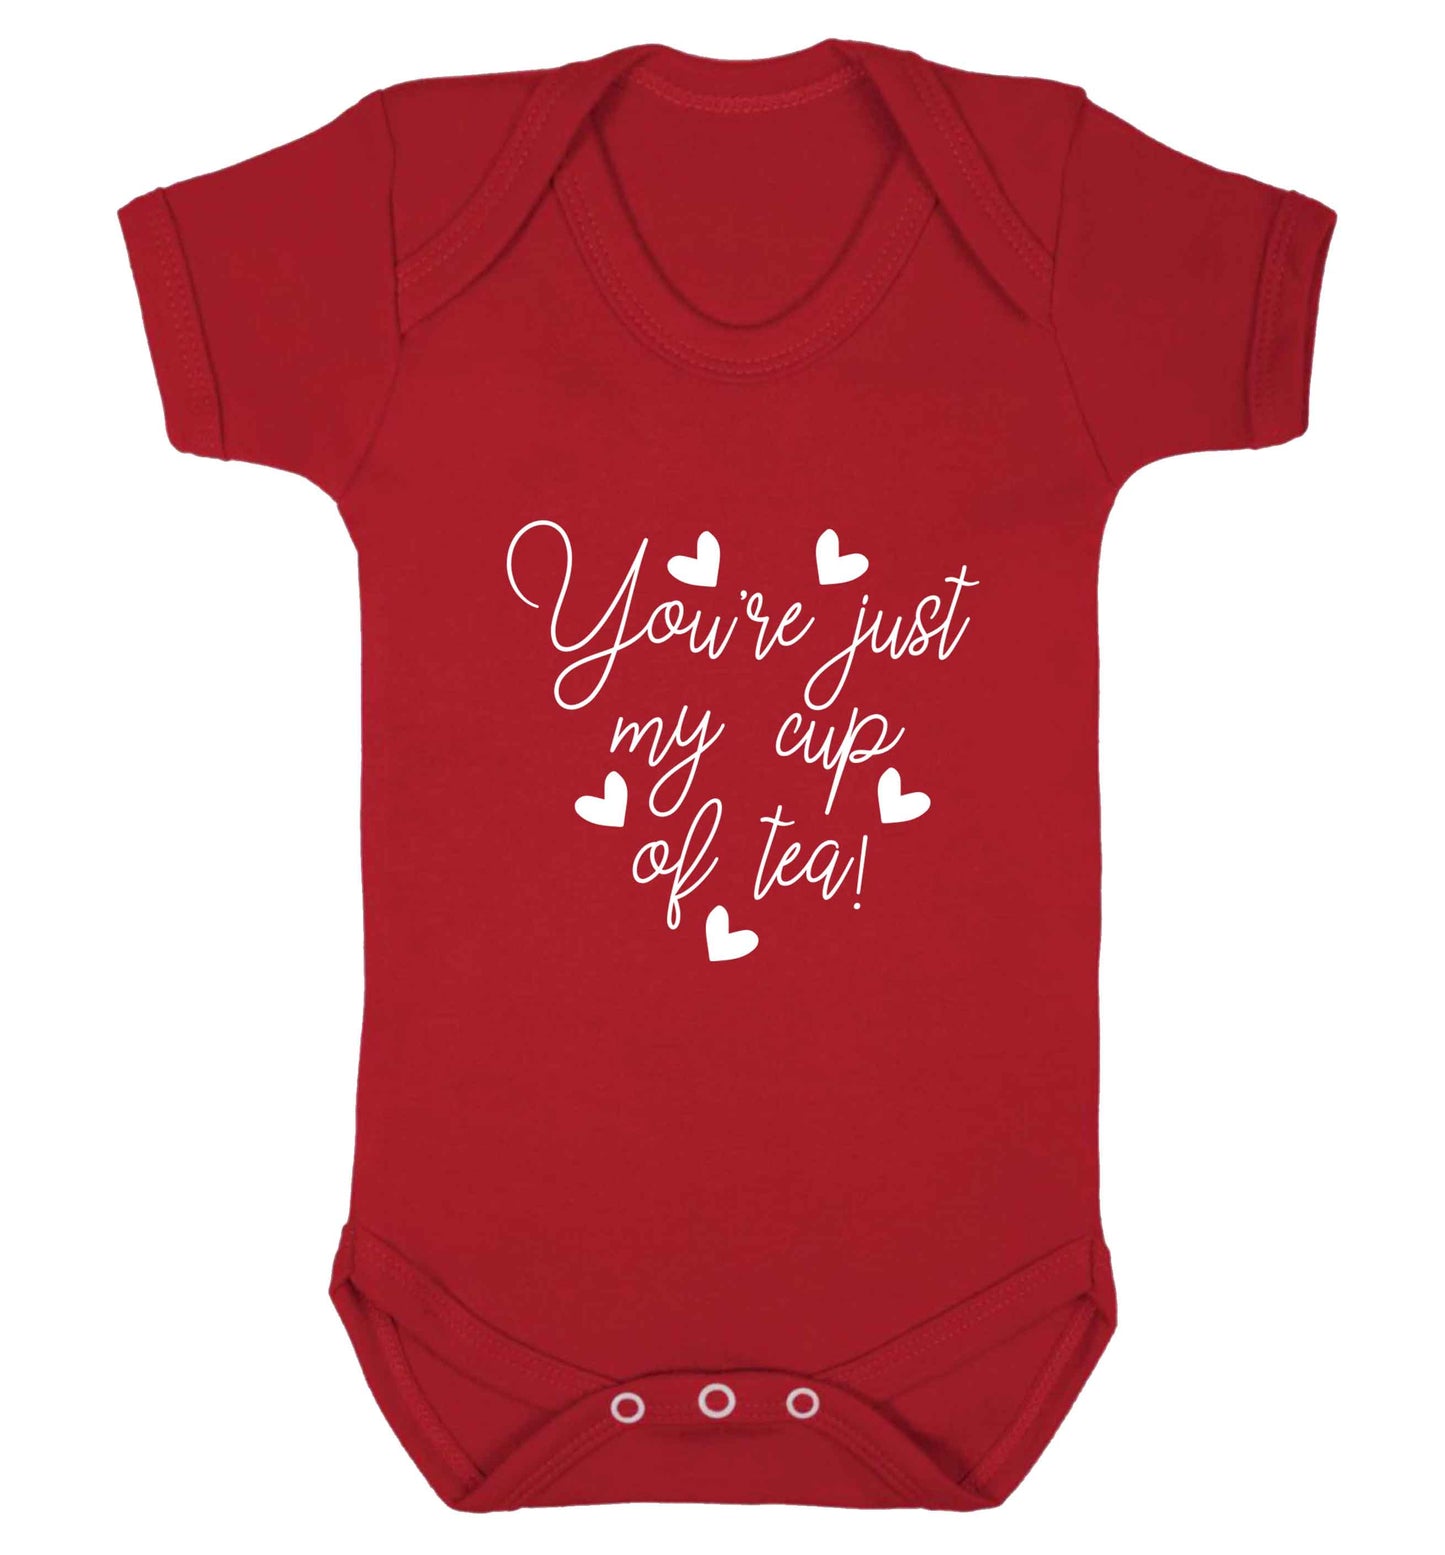 You're just my cup of tea baby vest red 18-24 months